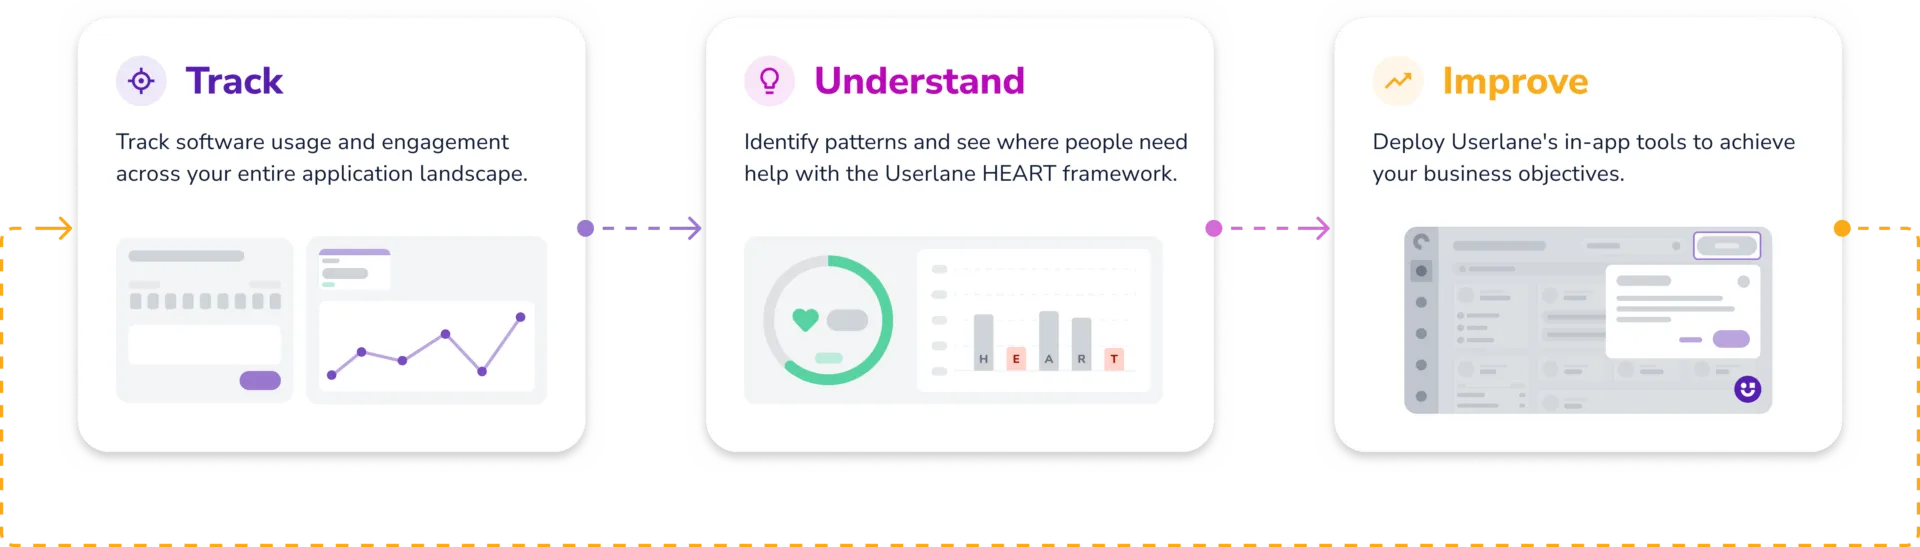 HEART is designed to help you track, understand and improve digital adoption across your entire organization.